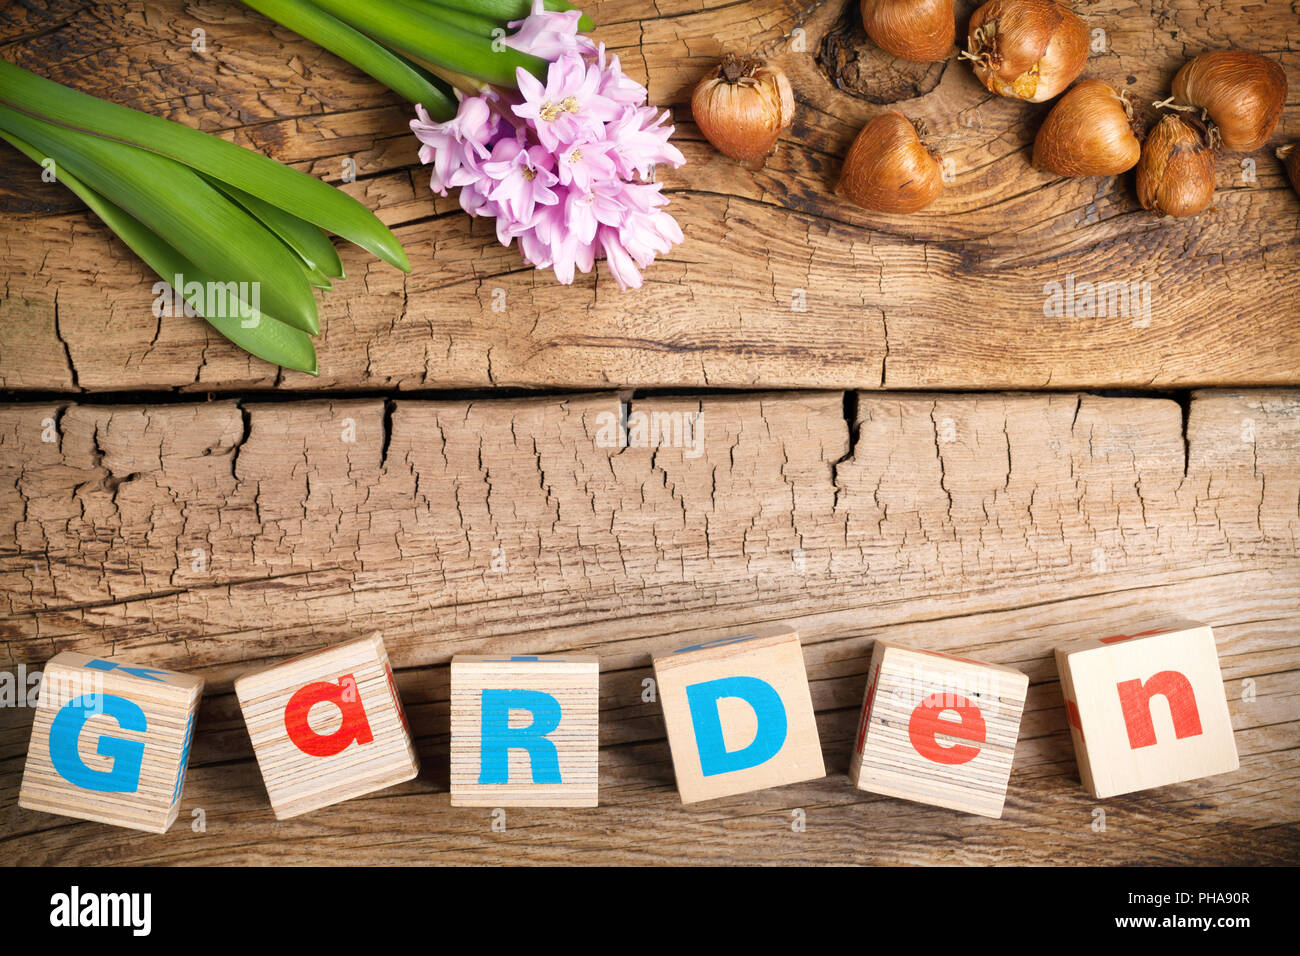 Gardening Background with Flower on Wooden Table Stock Photo